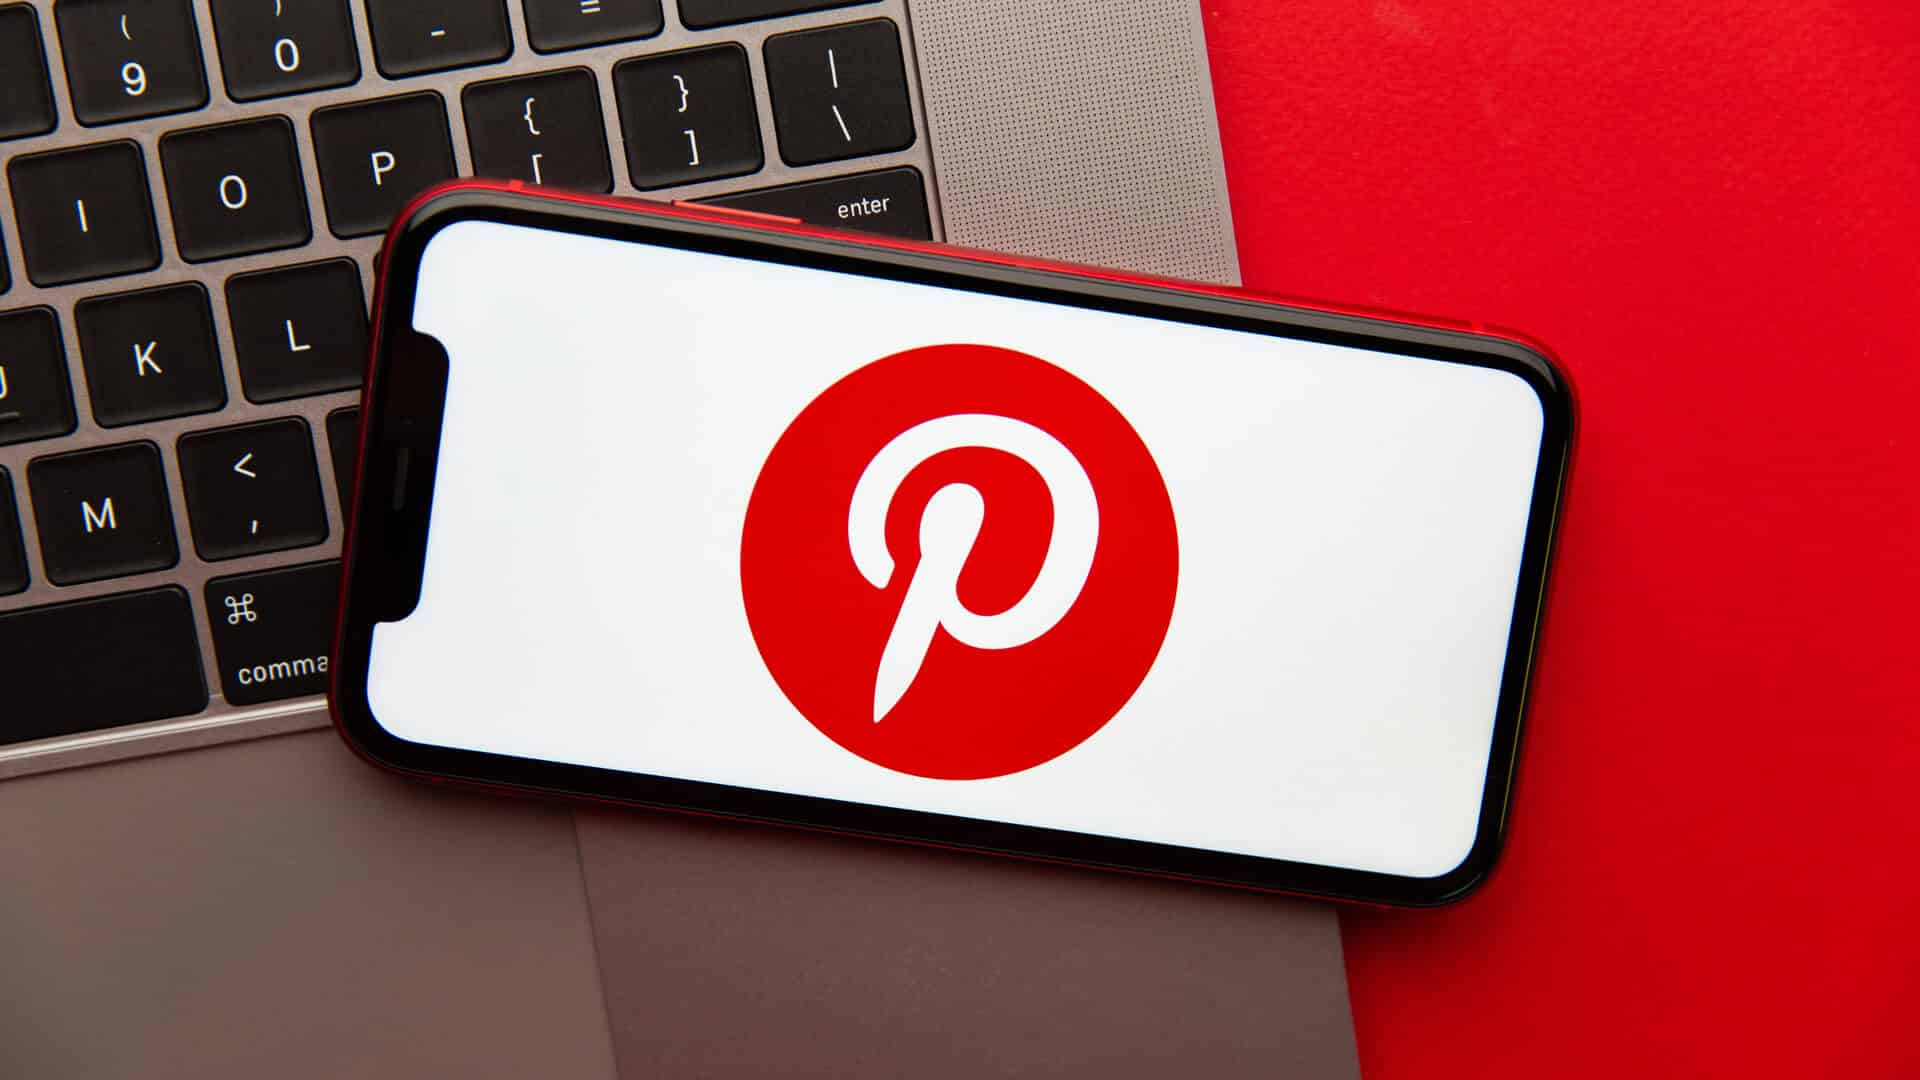 Pinterest revenue rises 12% as monthly active users reach all-time high